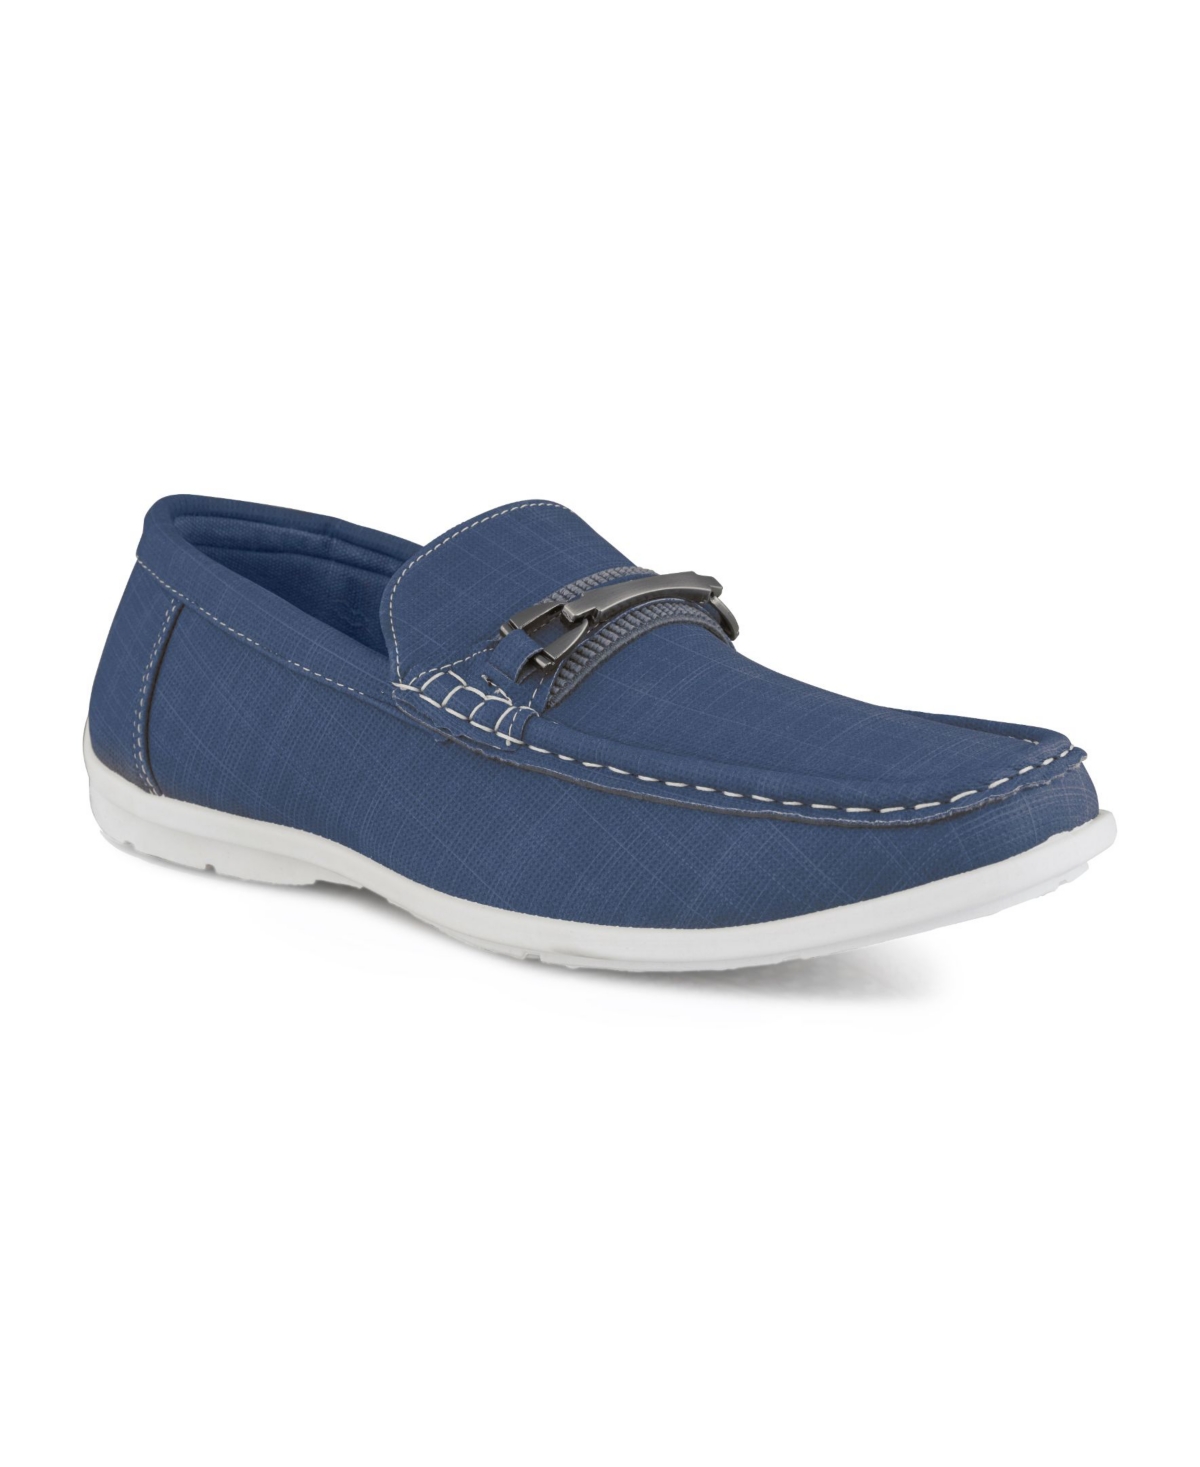 Akademiks Men's Moccasin Loafers In Navy